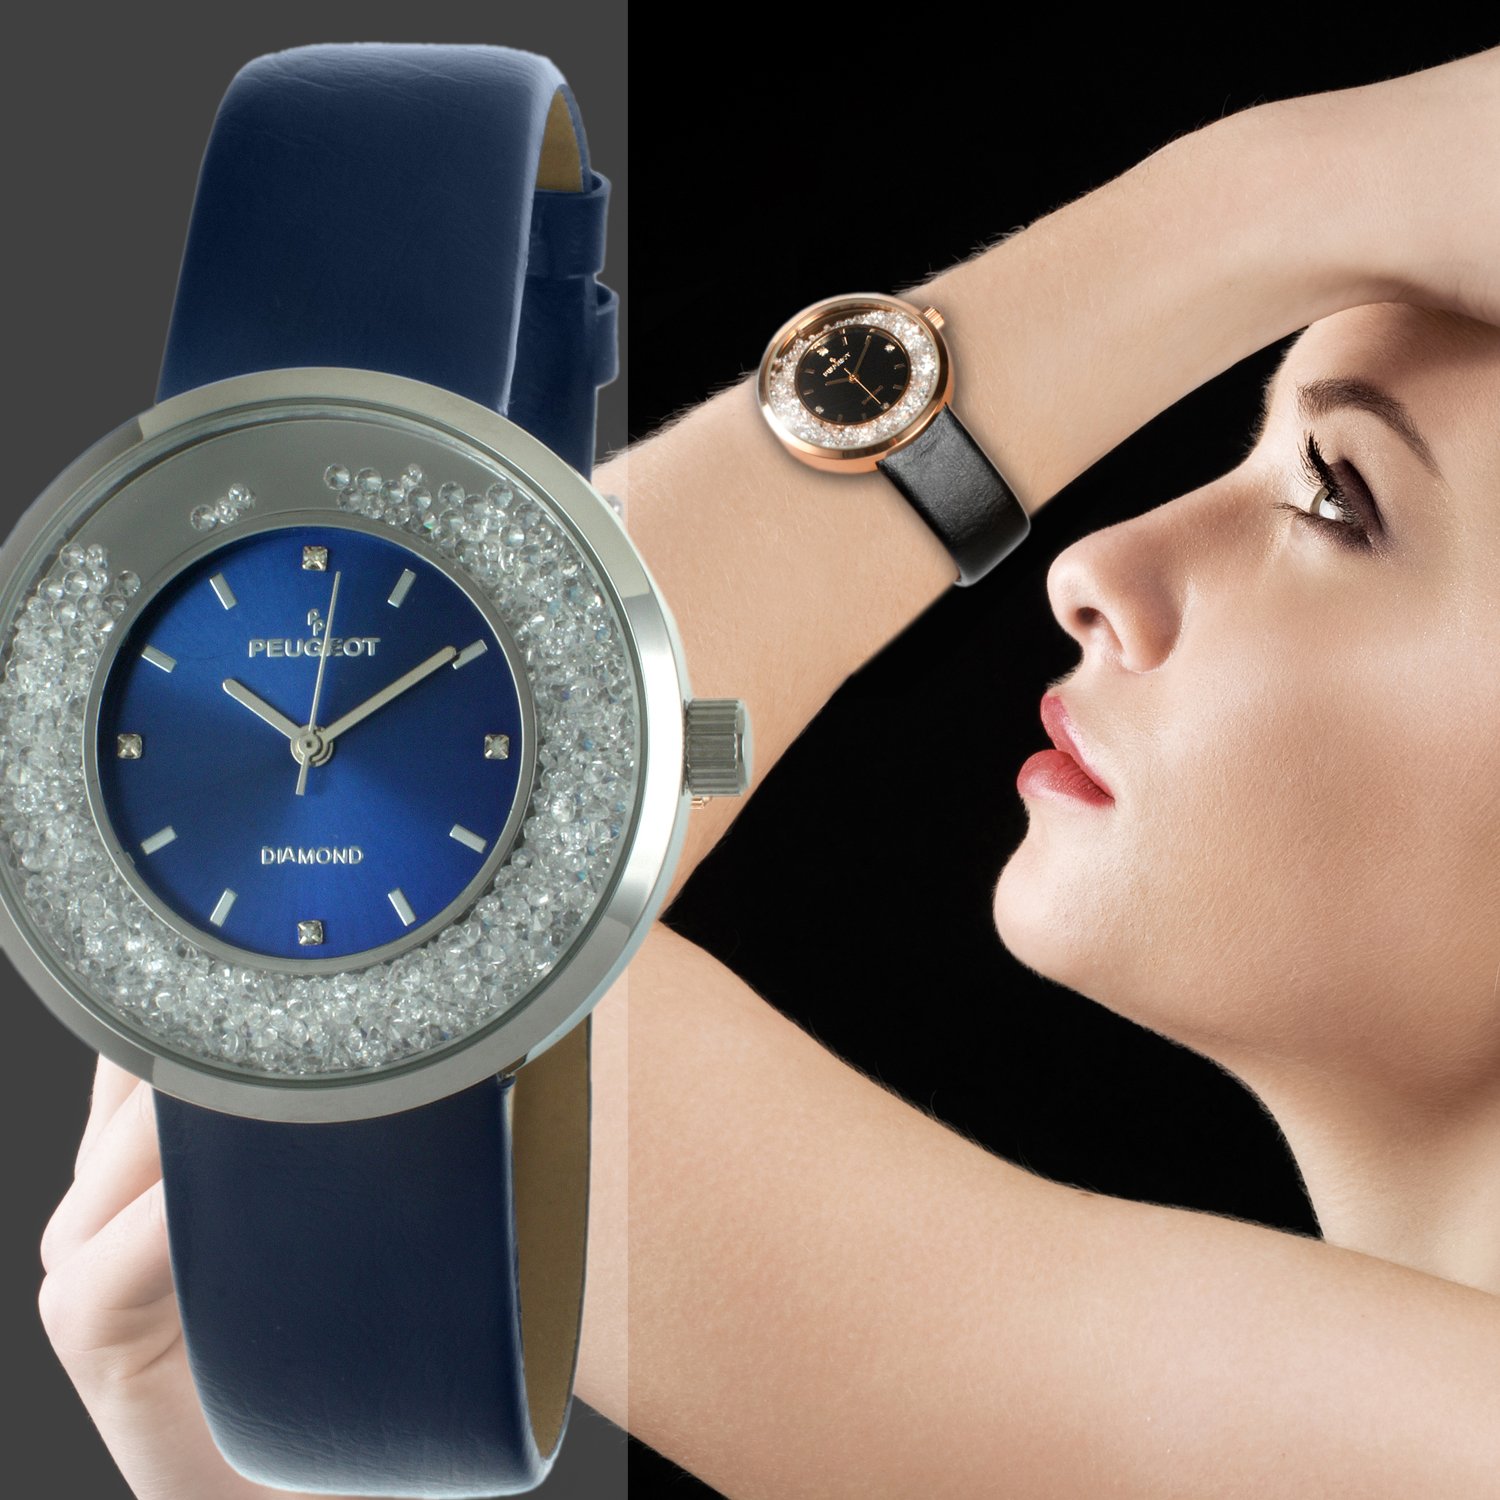 Peugeot Women Round Dress Watch - Slim Thin Case with Floating Genuine Diamond CZ and Leather Strap